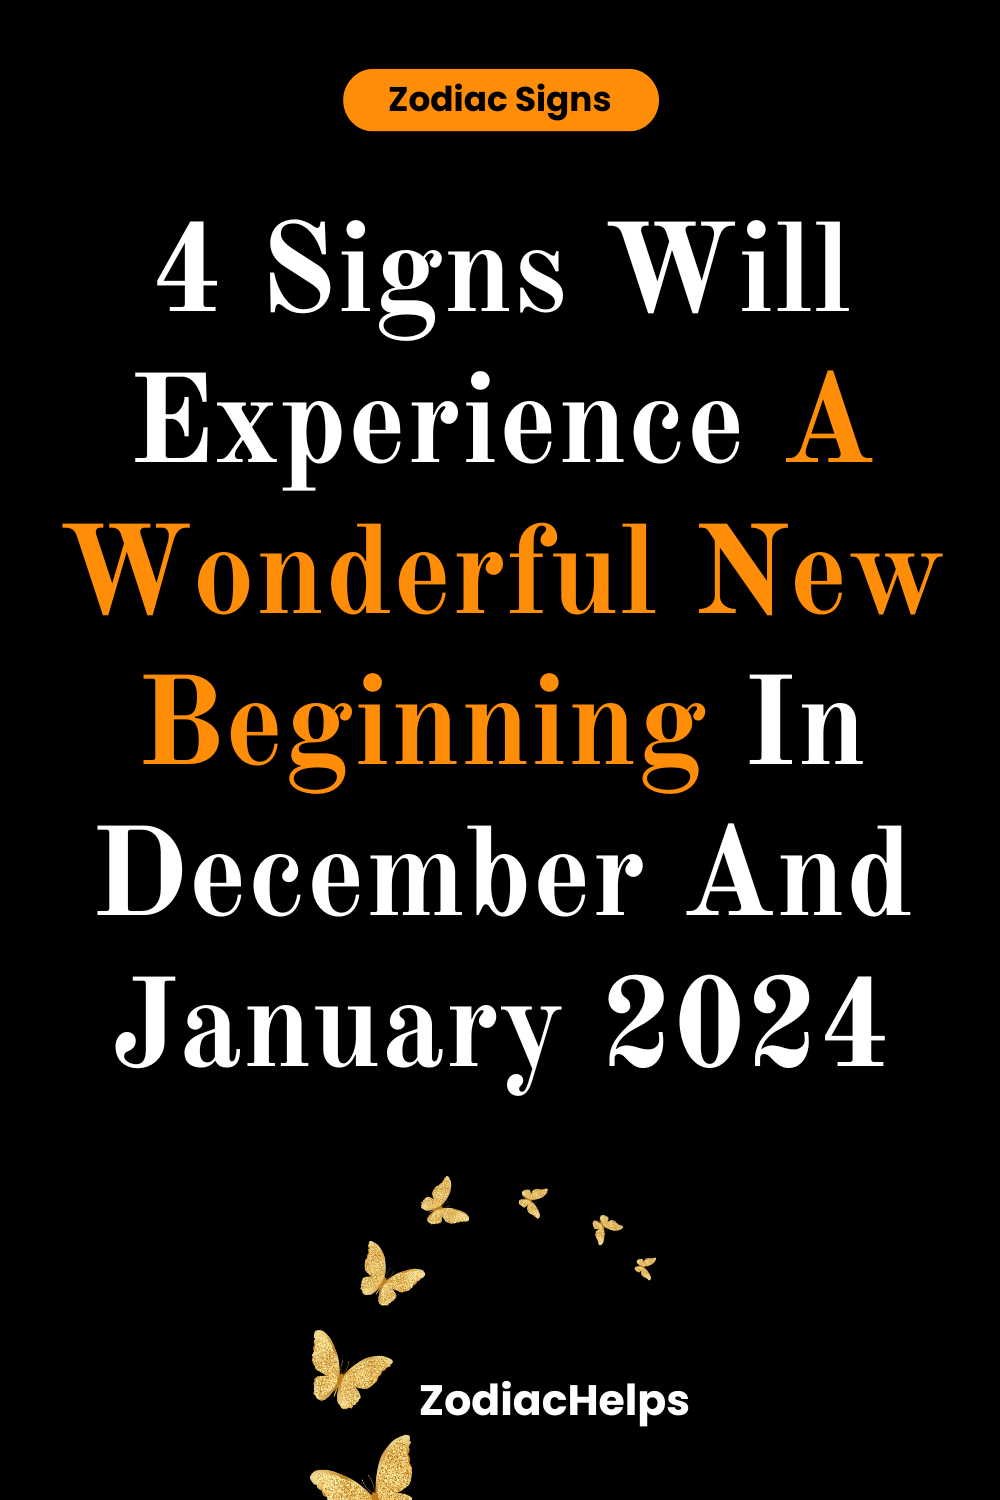 4 Signs Will Experience A Wonderful New Beginning In December And January 2024